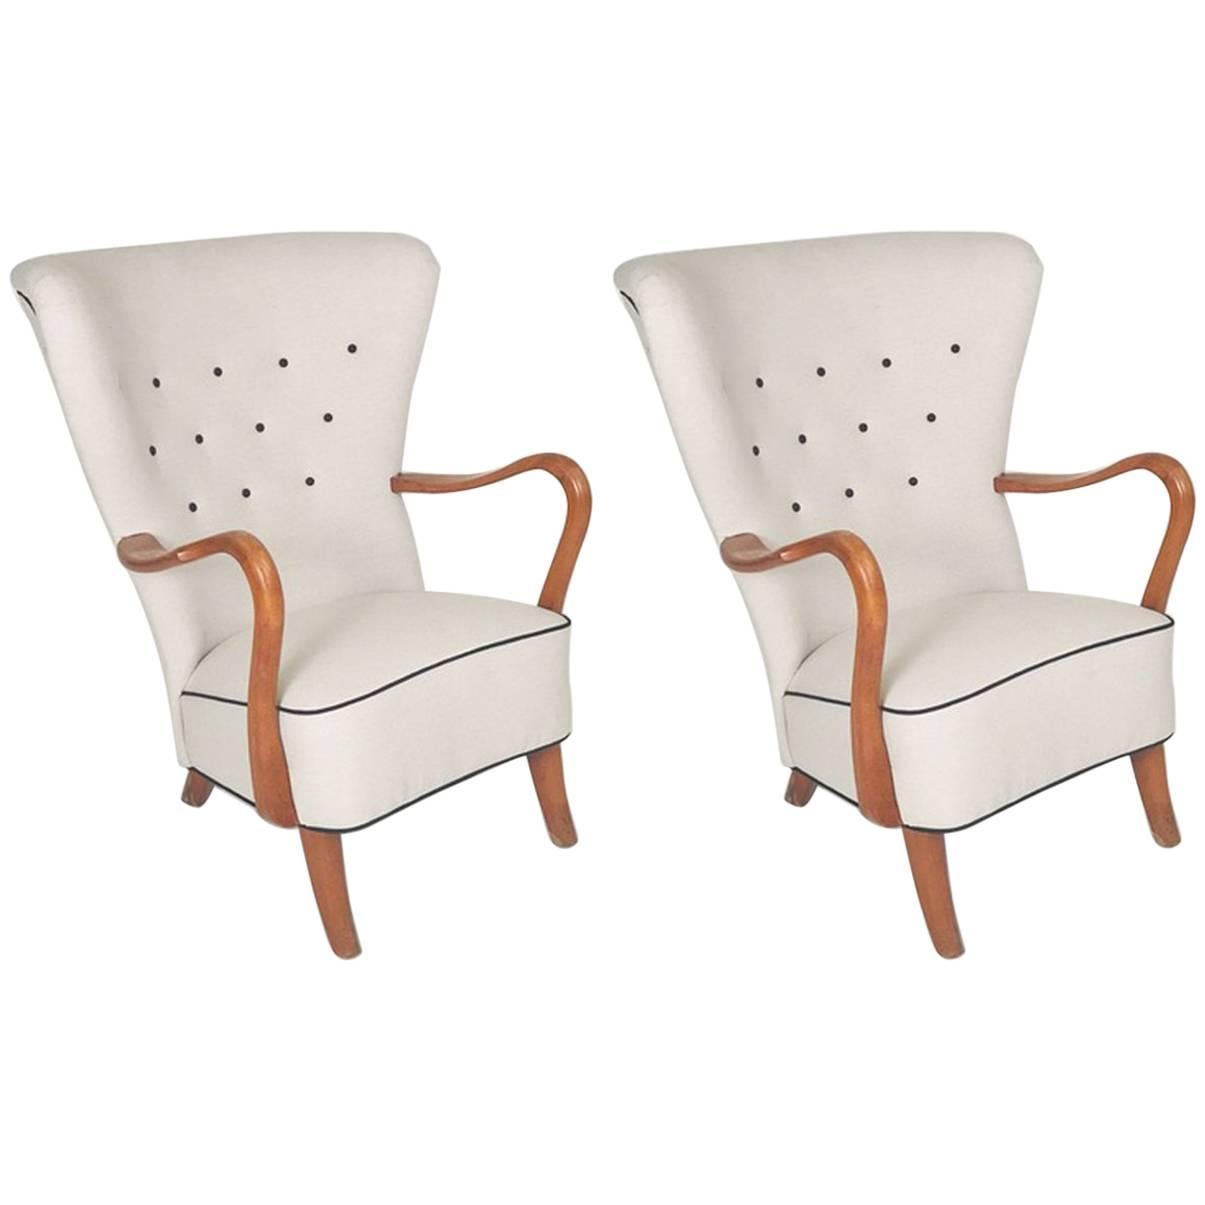 Pair of Danish 1940s Open Armchairs by Alfred Christensen